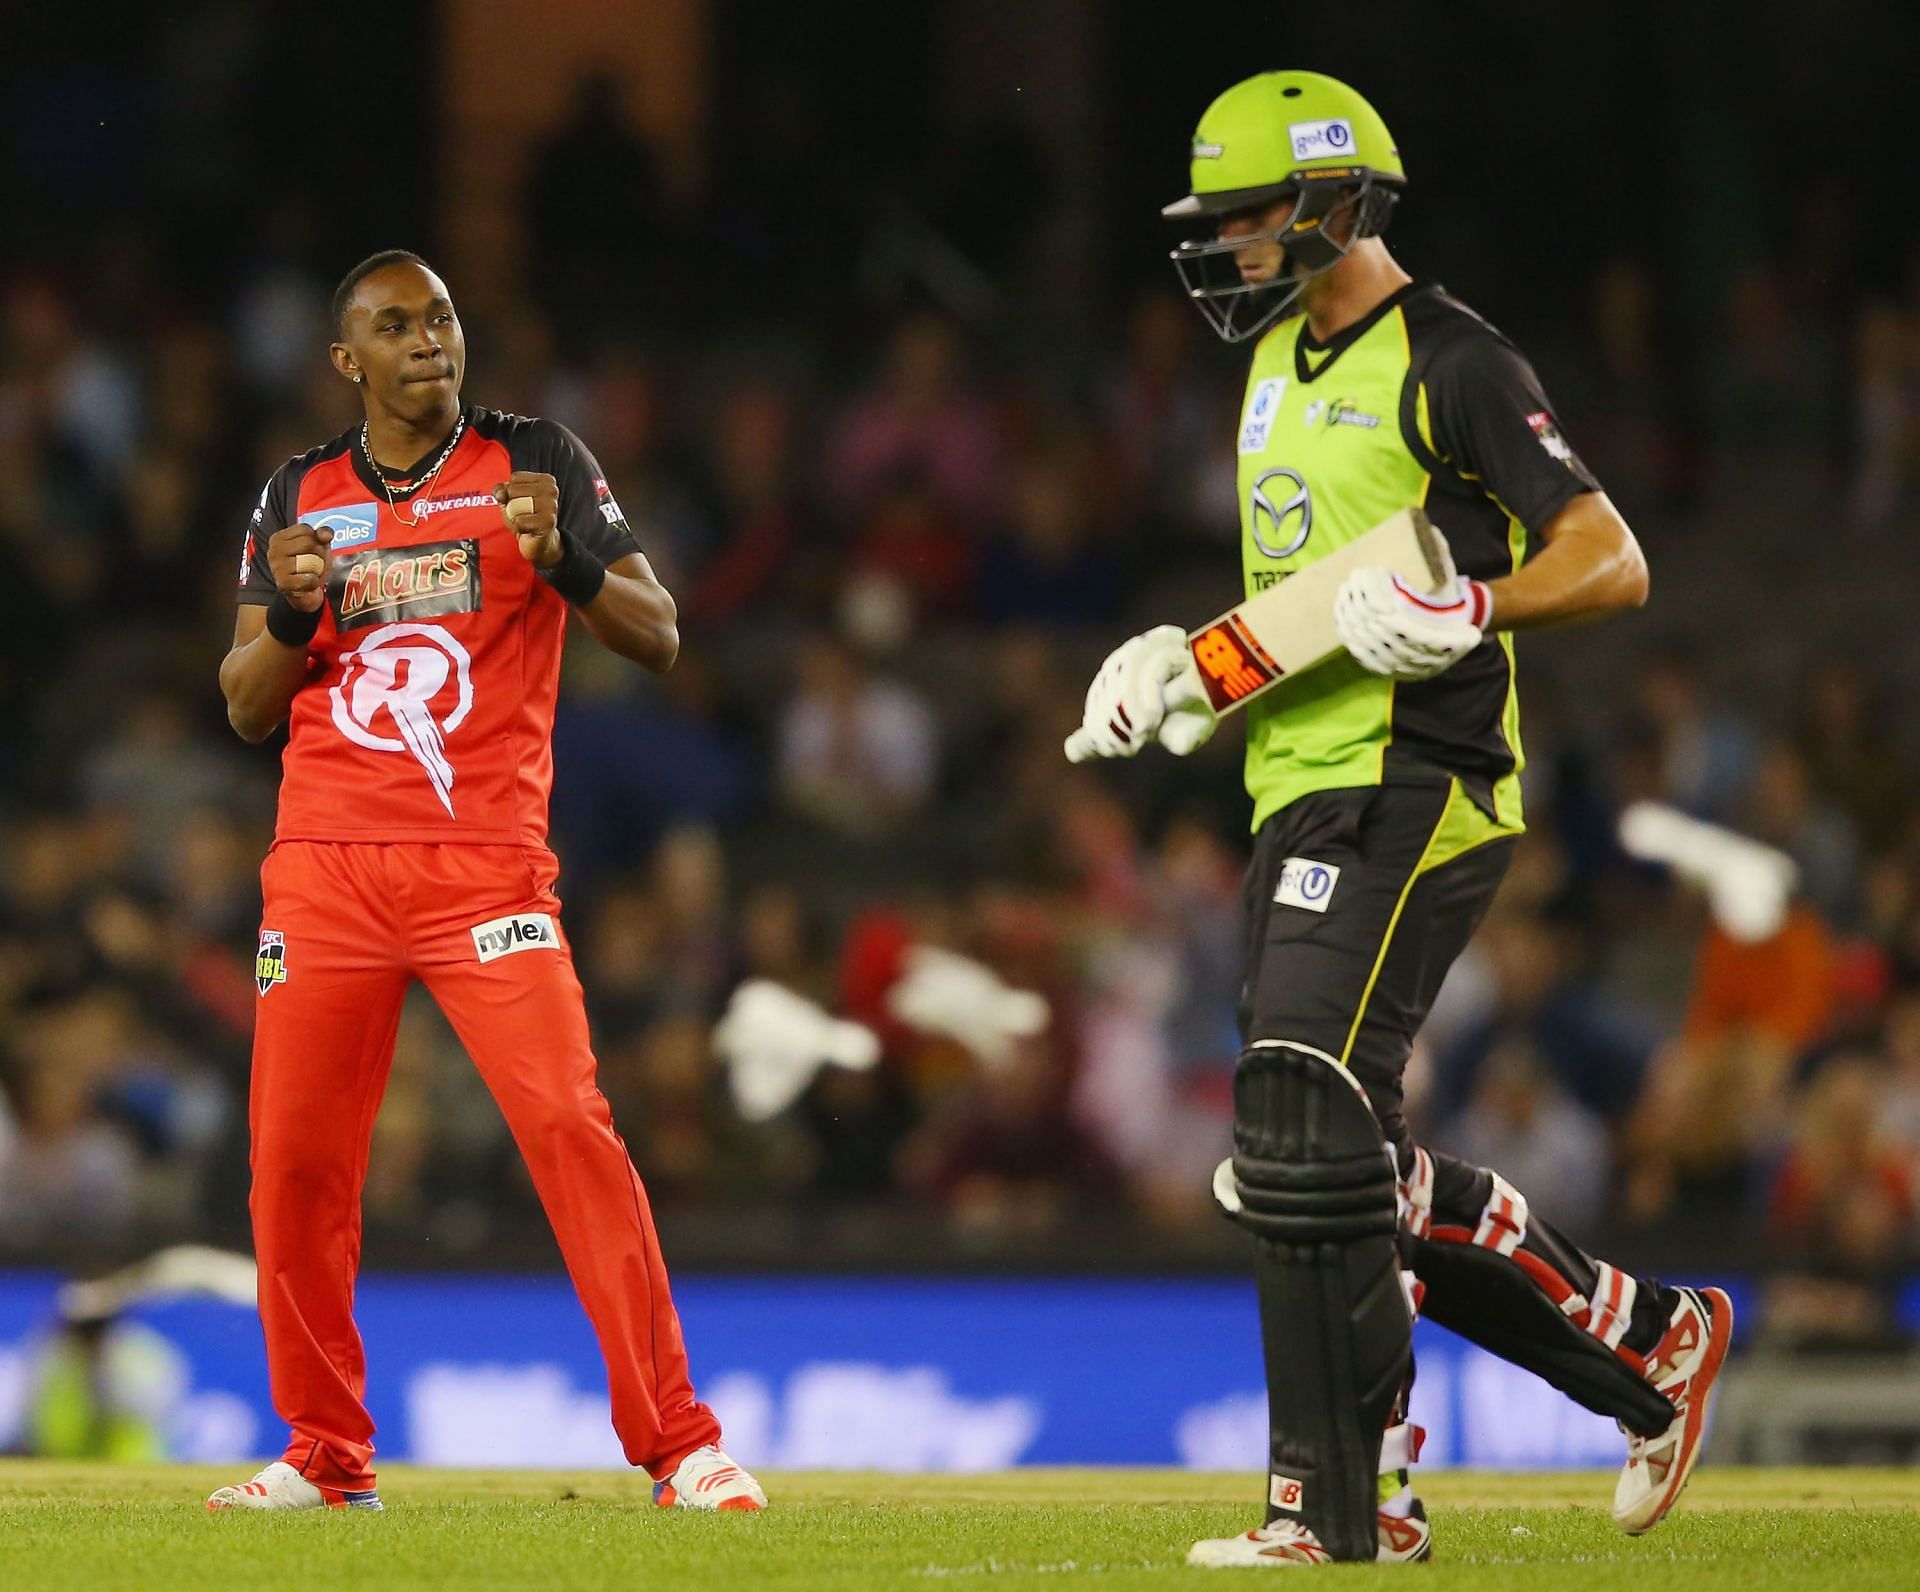 Dwayne Bravo often celebrates his wickets with some dance moves on the field (Image: Getty)